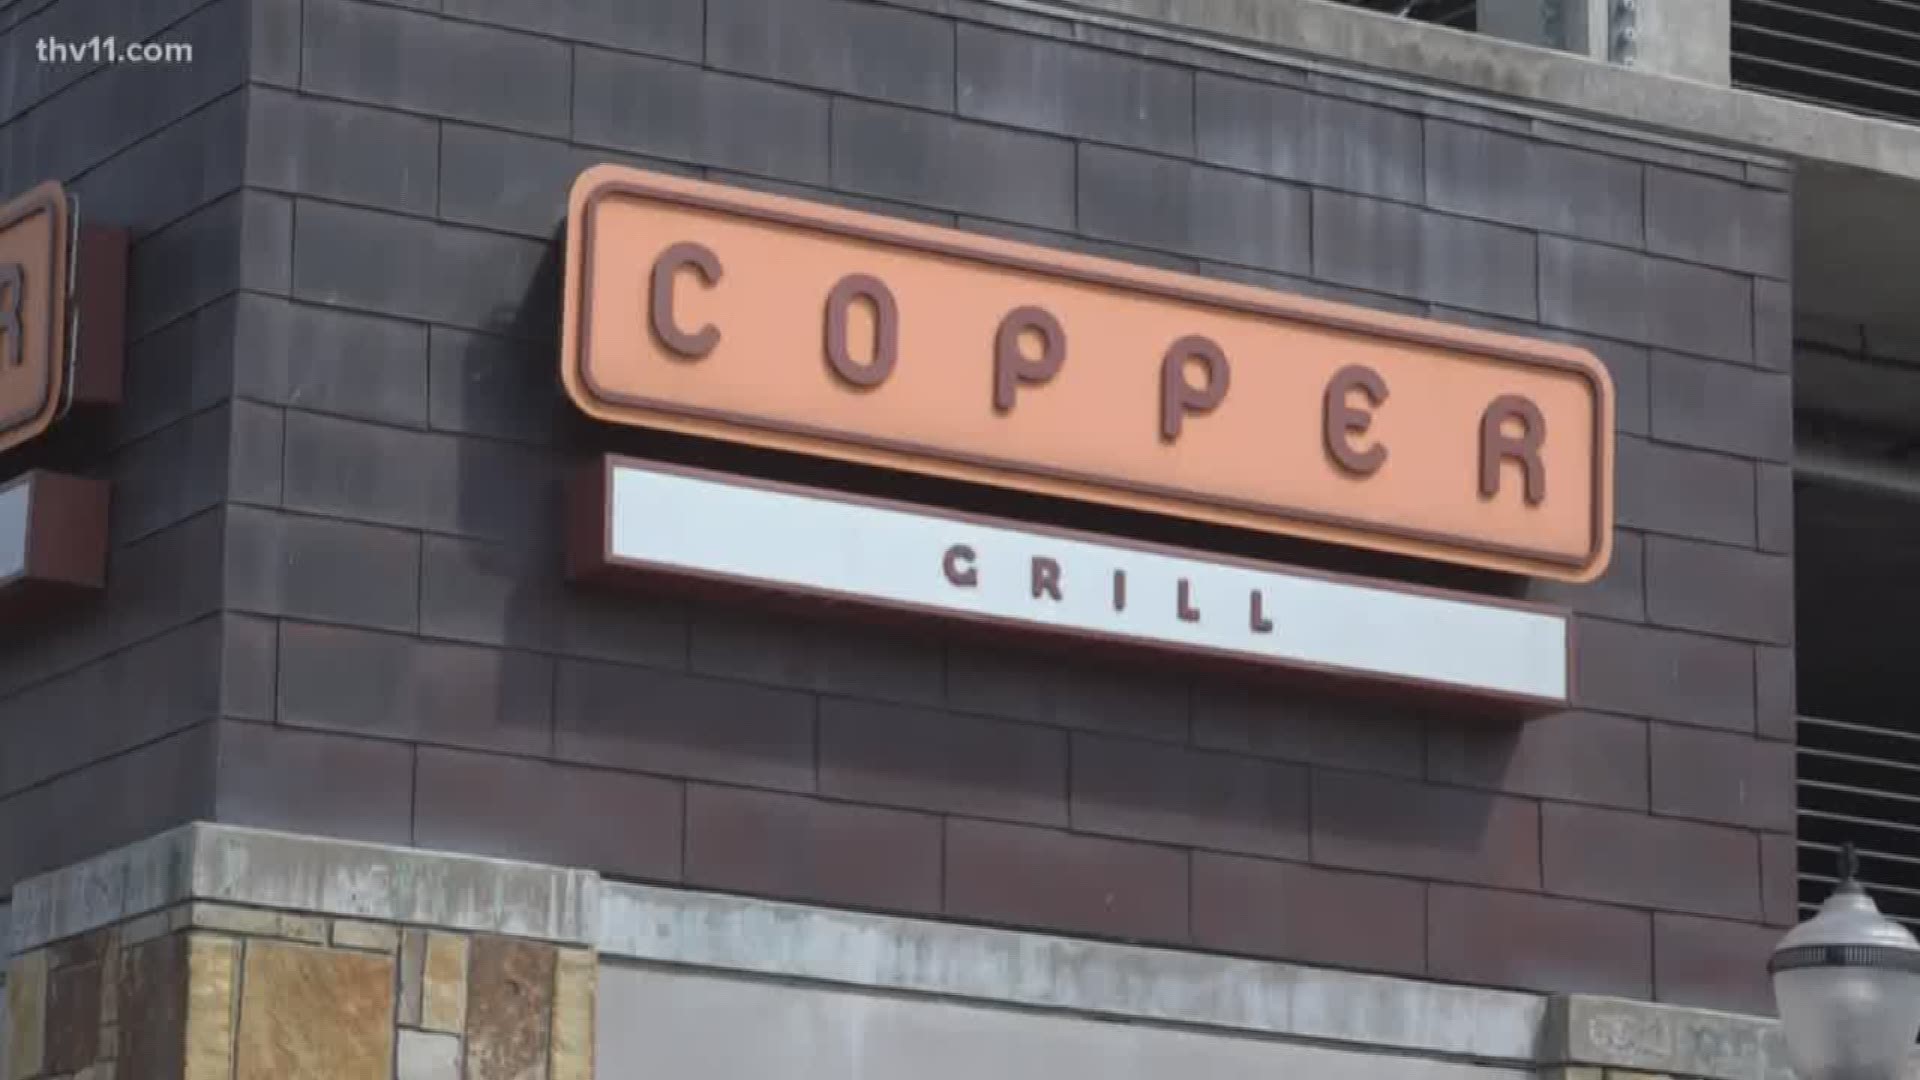 A Little Rock restaurant is helping those on the frontlines of the COVID-19 pandemic by making sure they have a hot meal. Copper Grill is giving back.